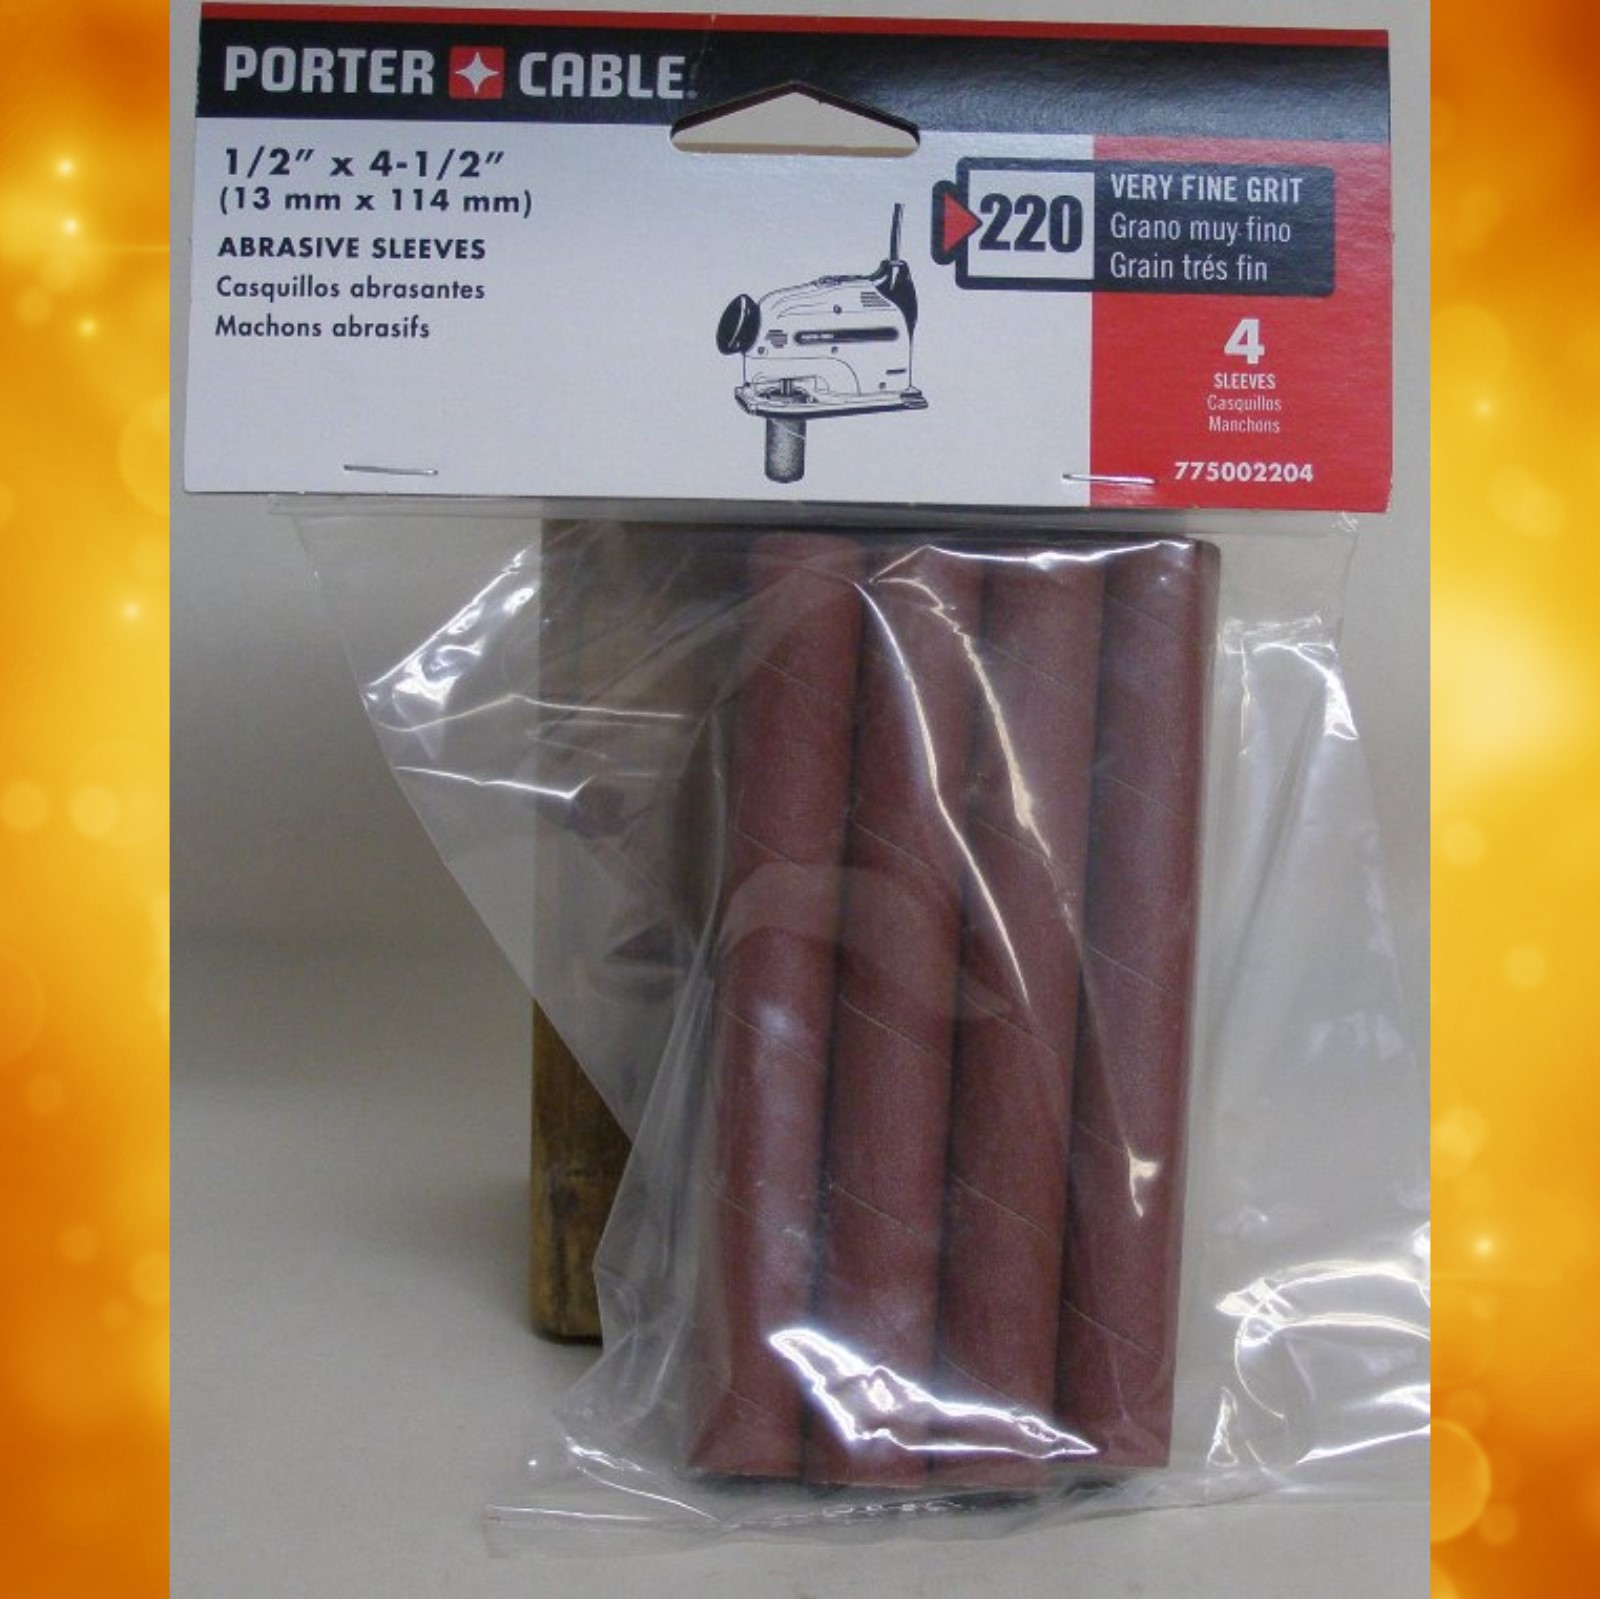 Porter Cable Sanding Sleeves 775002204 Porter-Cable 1/2" Drum Spindle Sanding Sleeve - 220 Grit 775002204